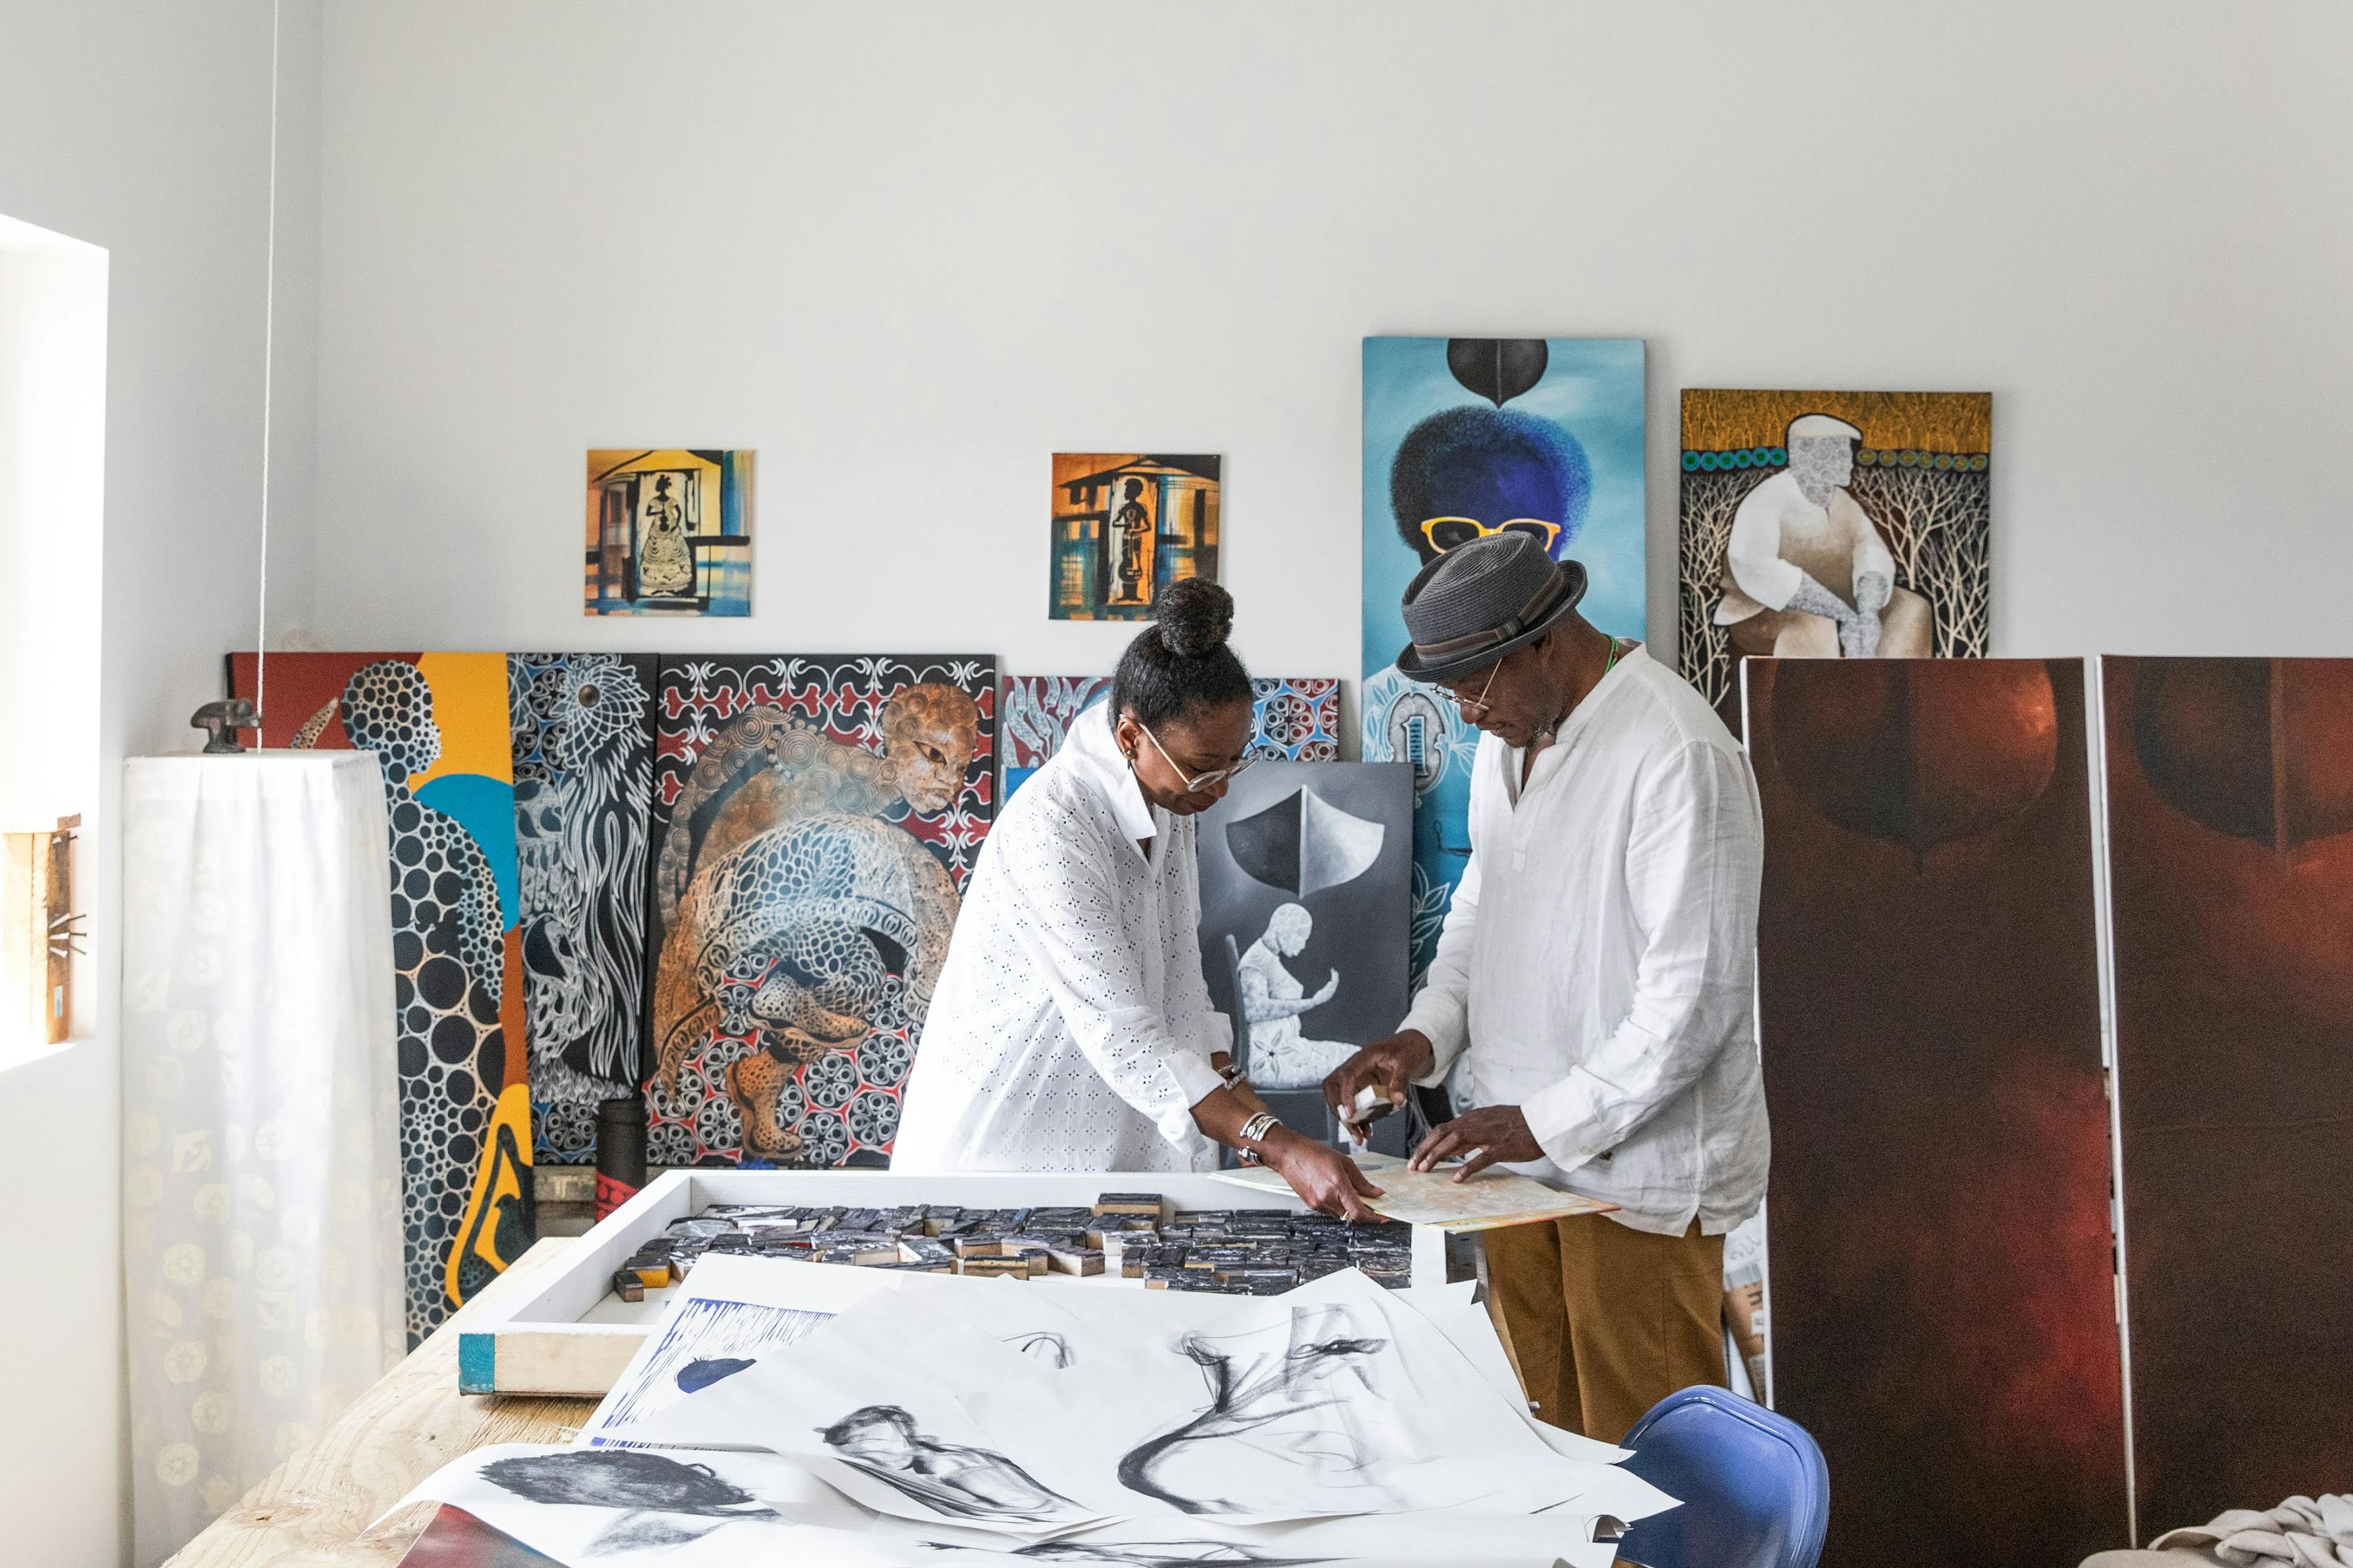 man and woman working together in studio surrounded by paintings